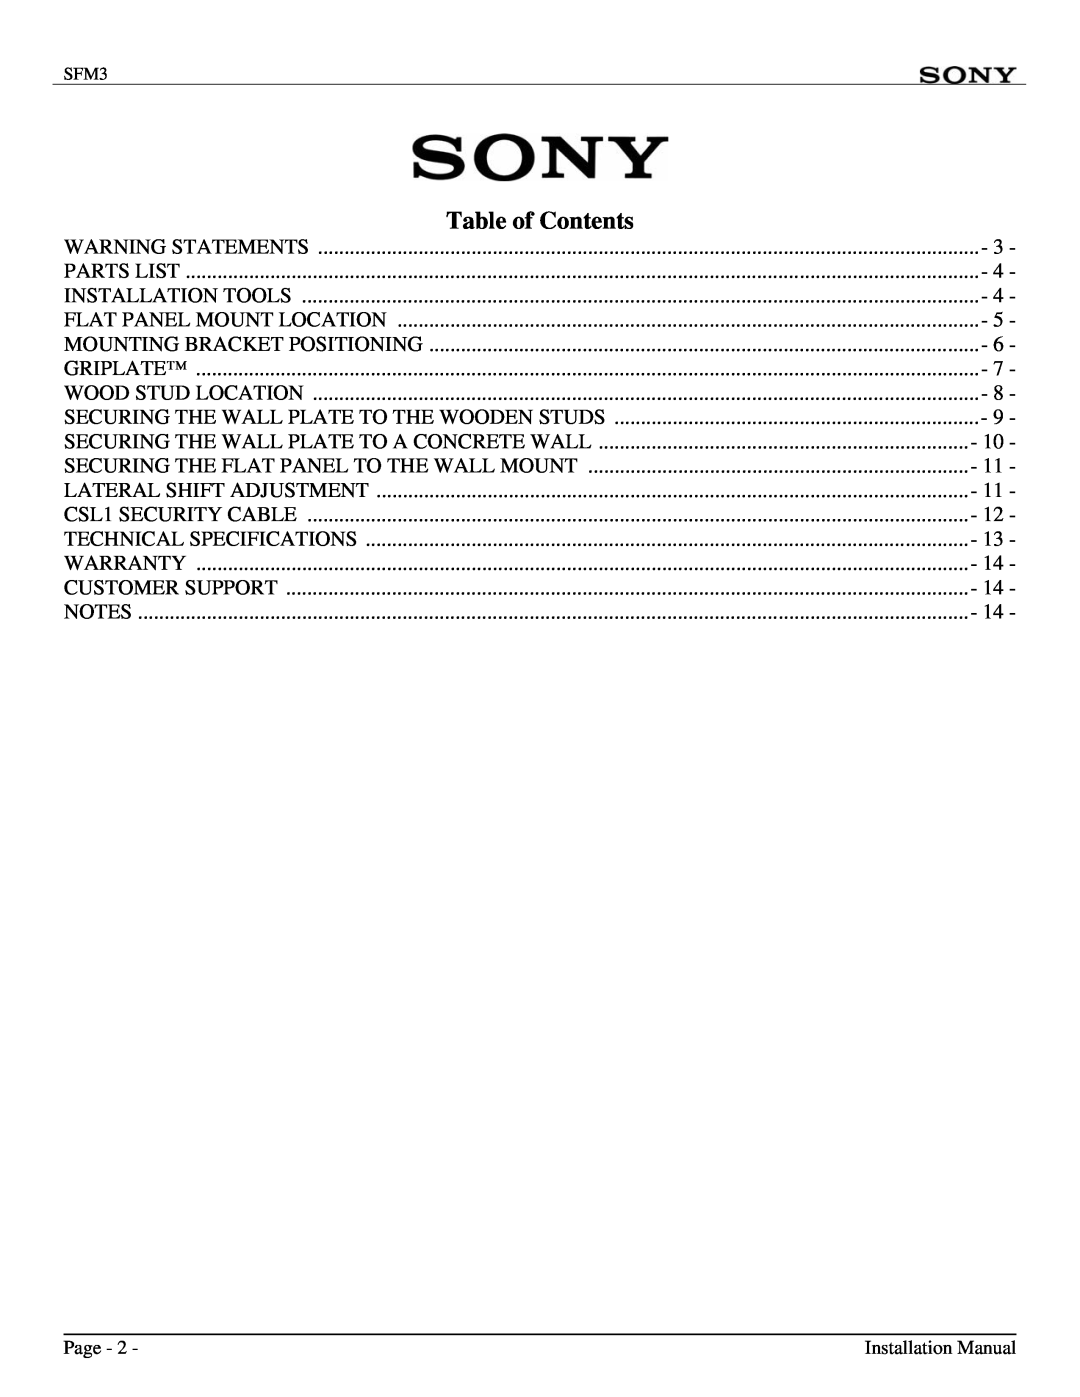 Sony SFM3 installation manual Table of Contents 